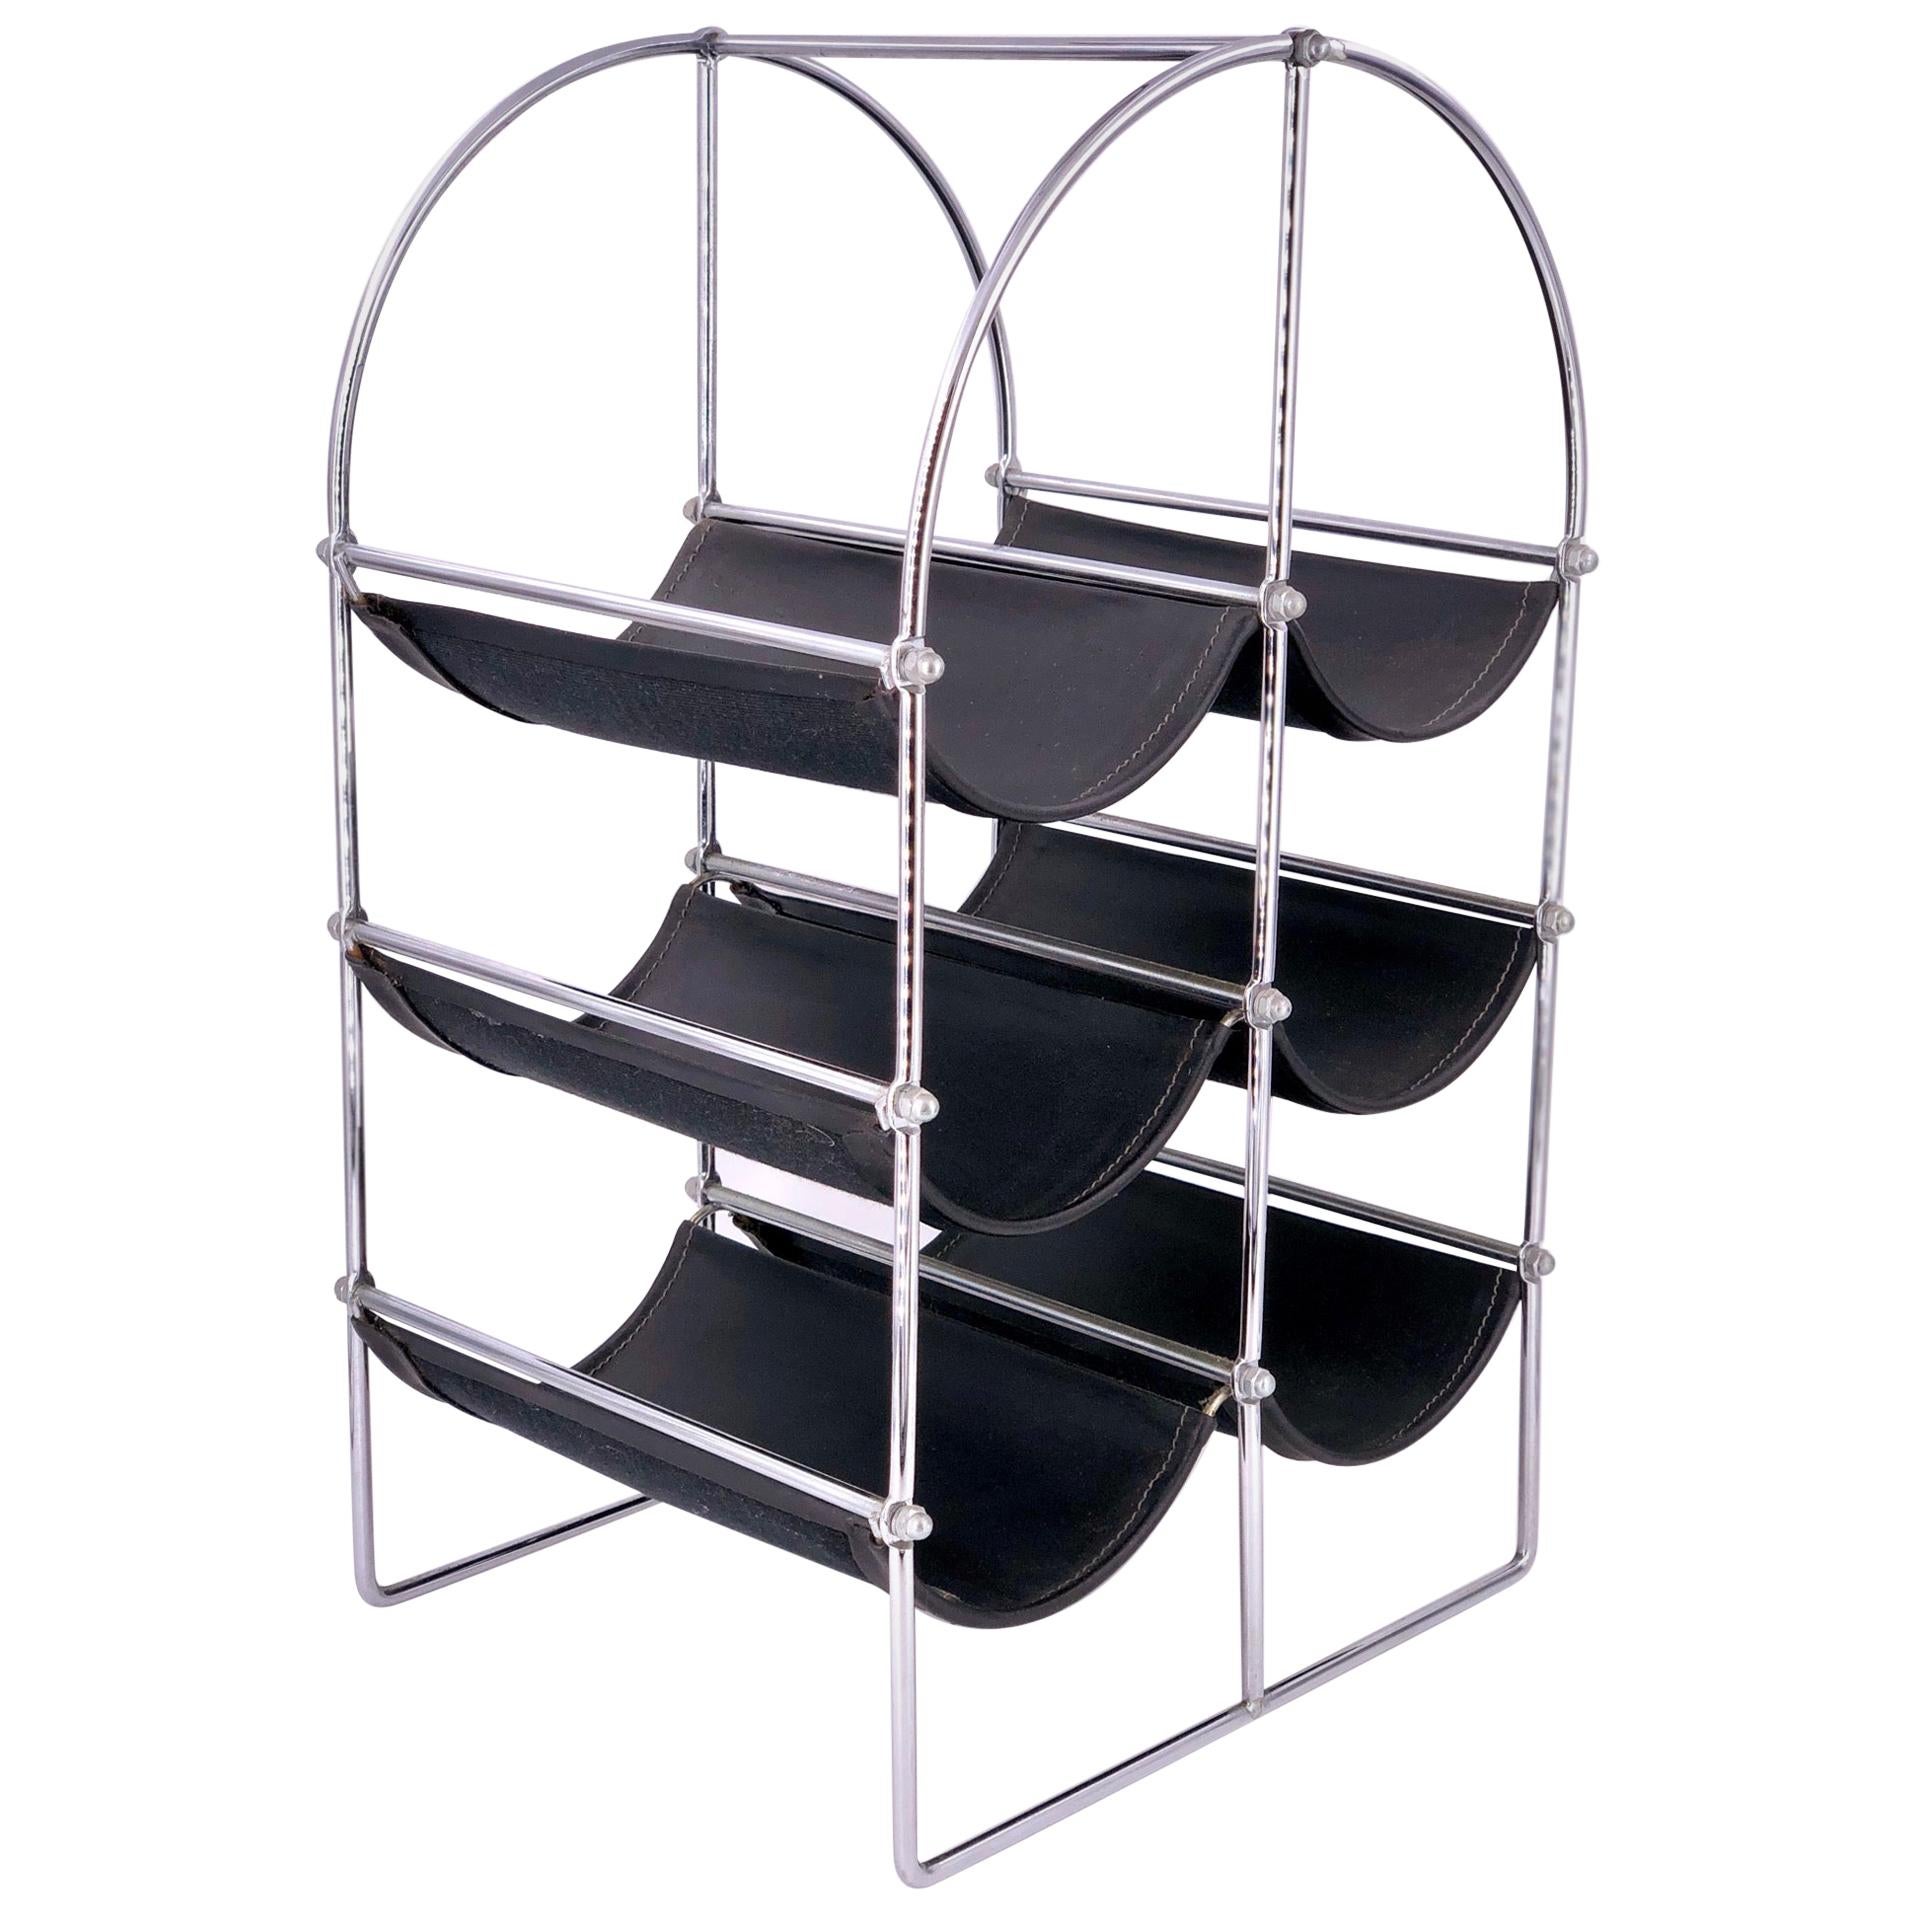 1970s Six Bottle Capacity Wine Rack in Chrome and Leather